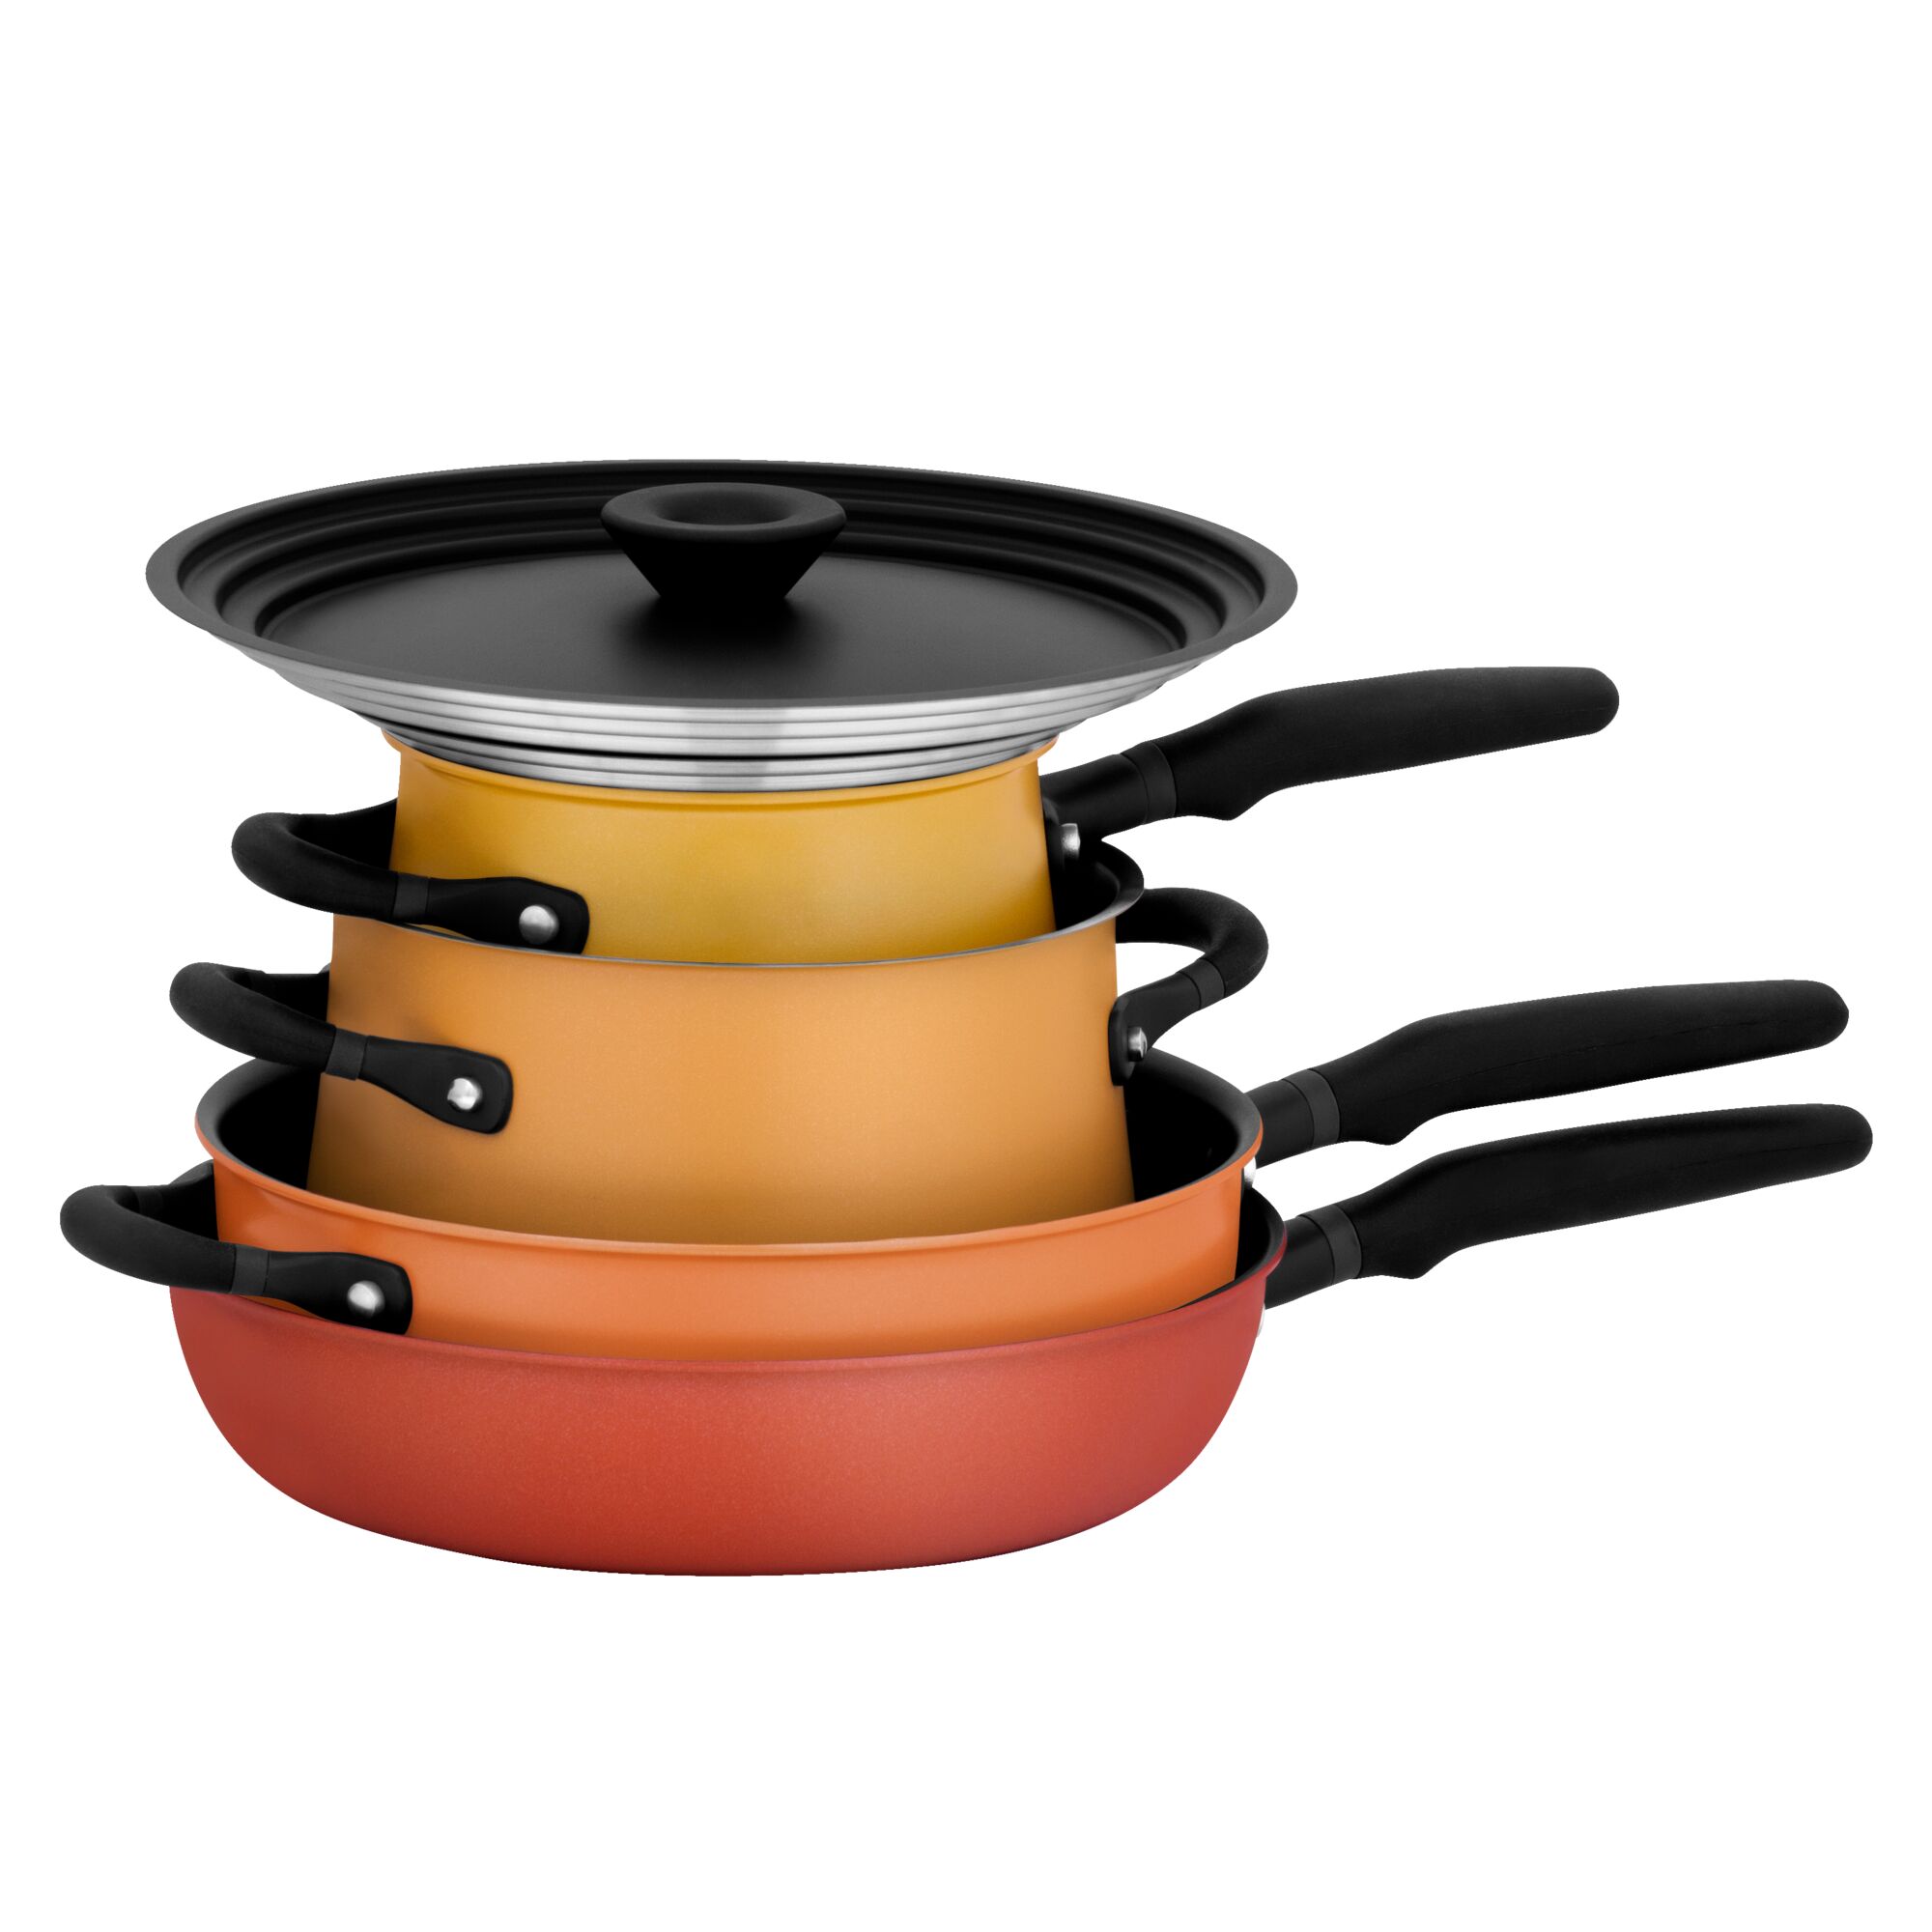 6-Piece Nonstick and Stainless Steel Cookware Set